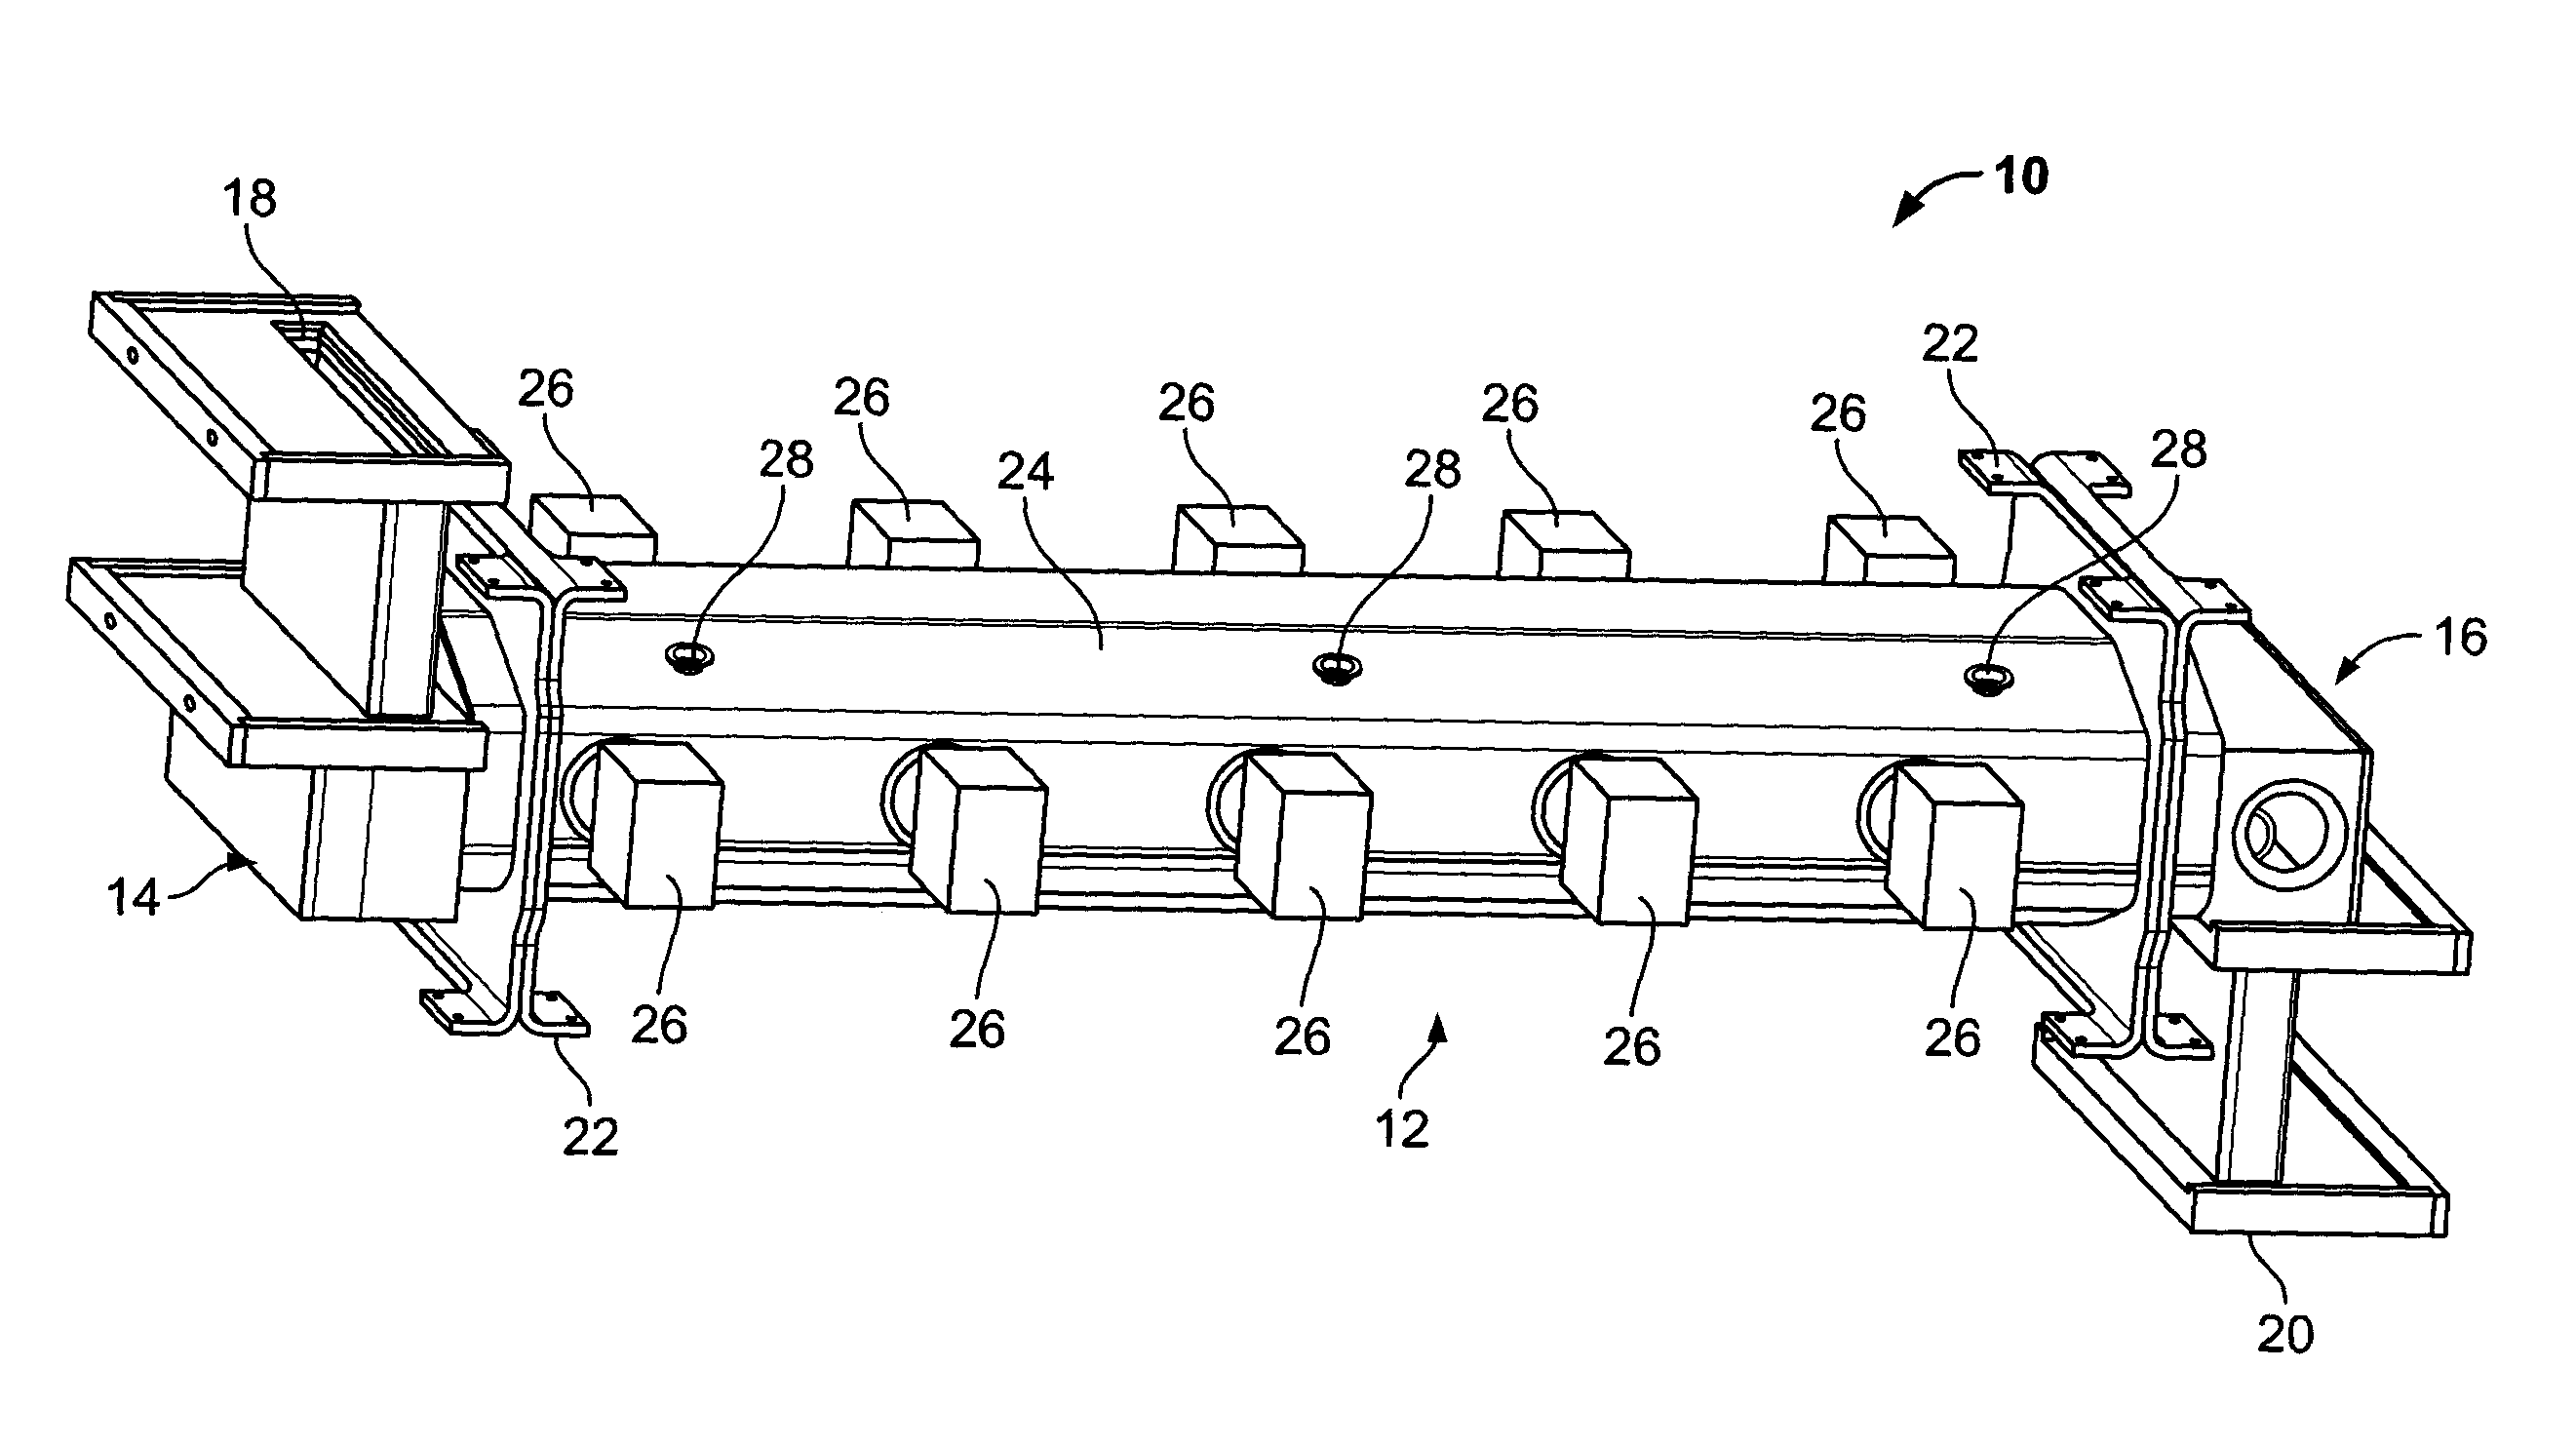 Apparatus and method for dehydration using microwave radiation